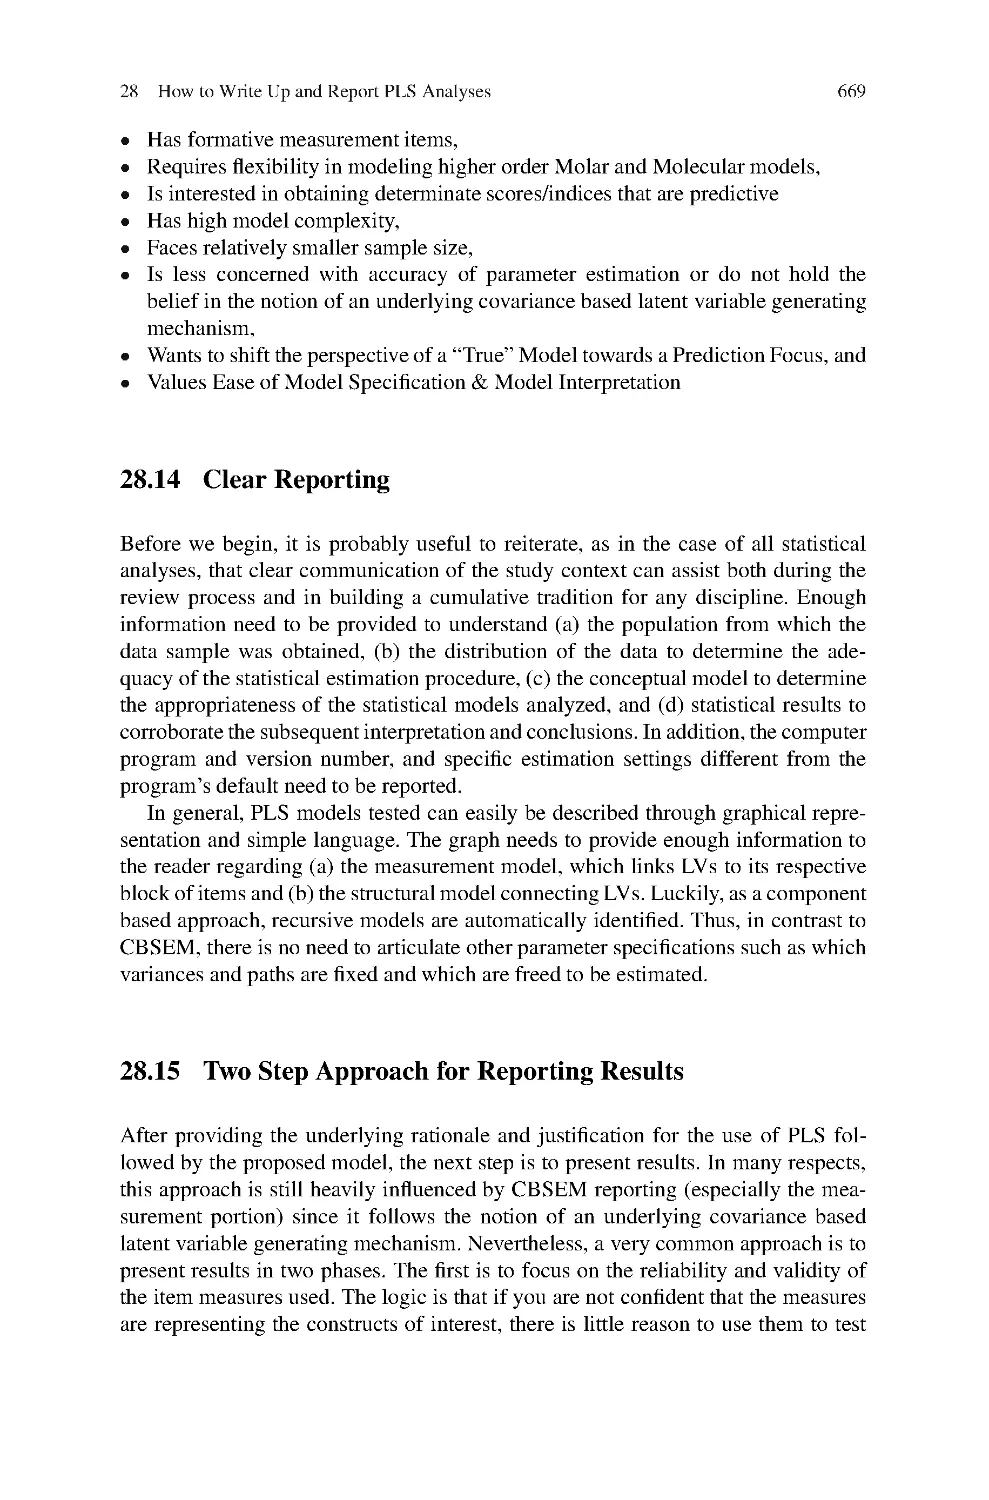 28.14 Clear Reporting
28.15 Two Step Approach for Reporting Results